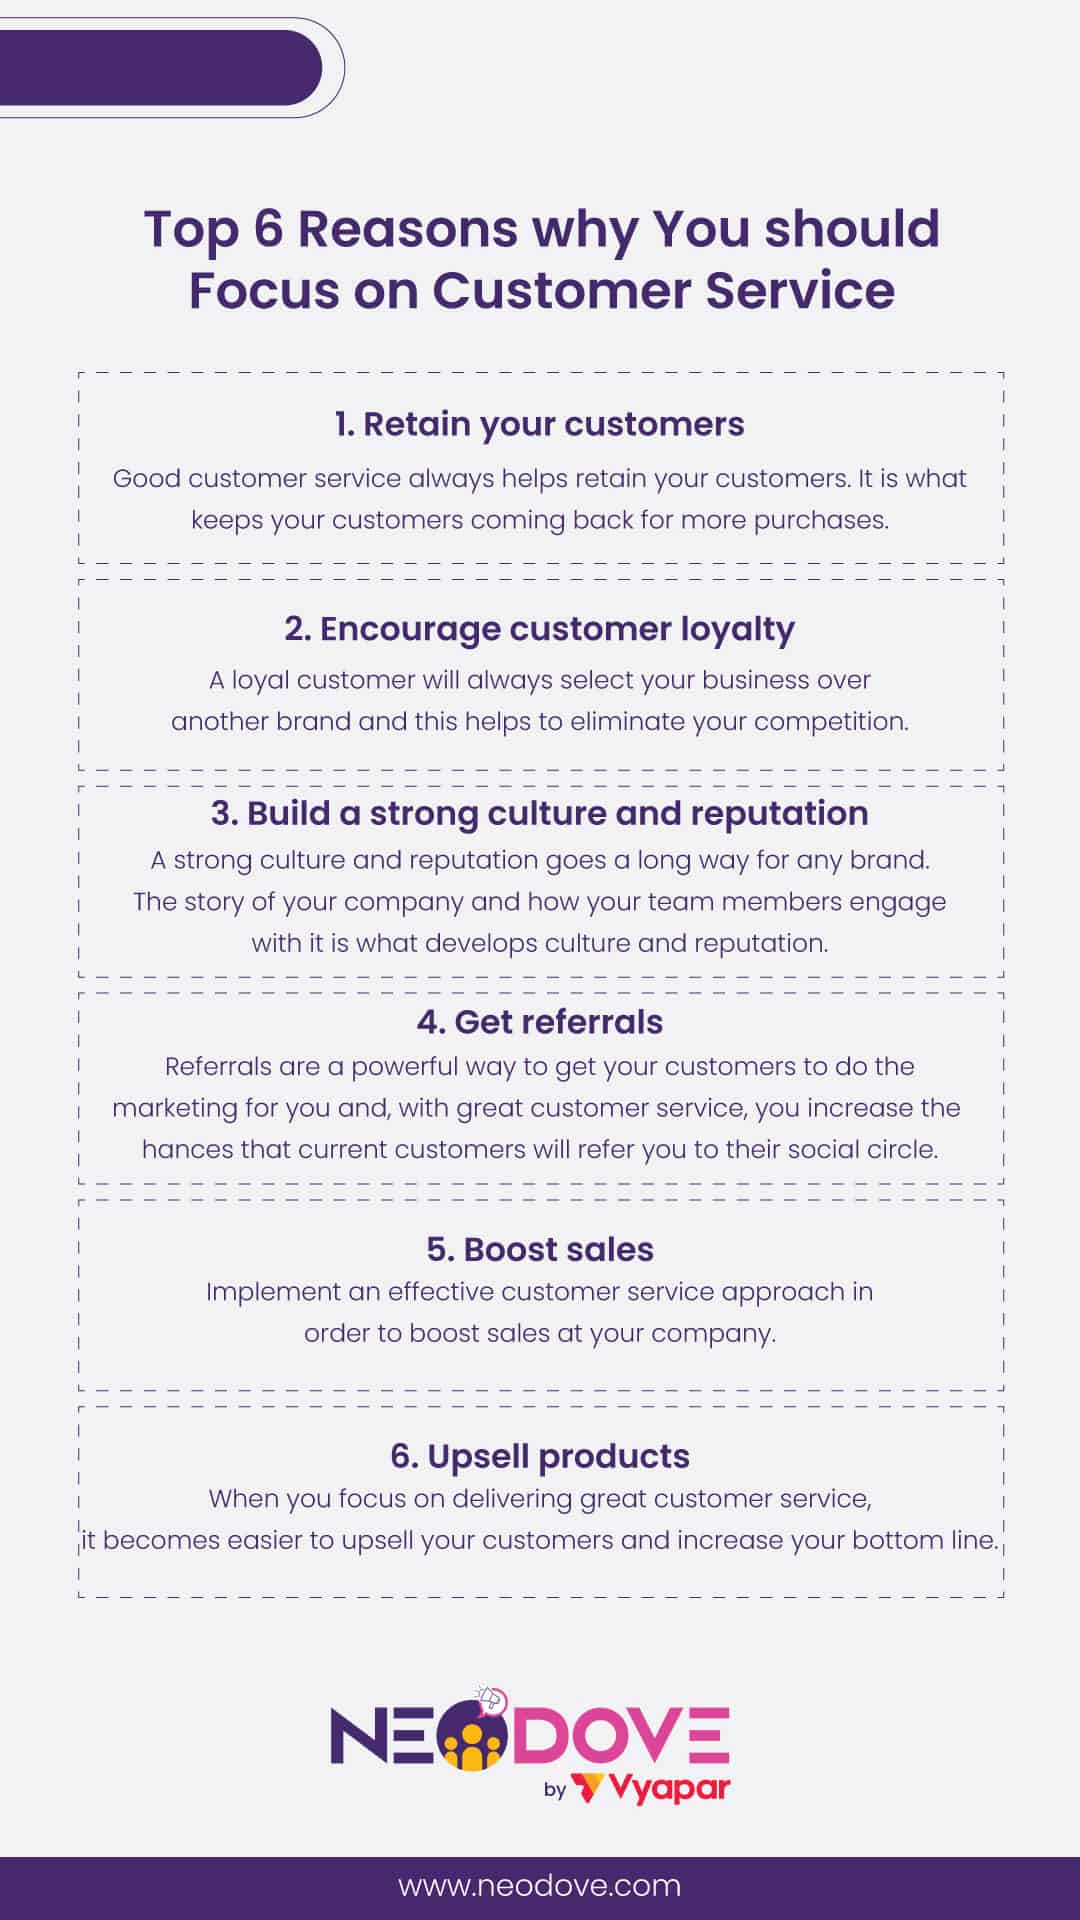 Top 6 Reasons why You should Focus on Customer Service - NeoDove